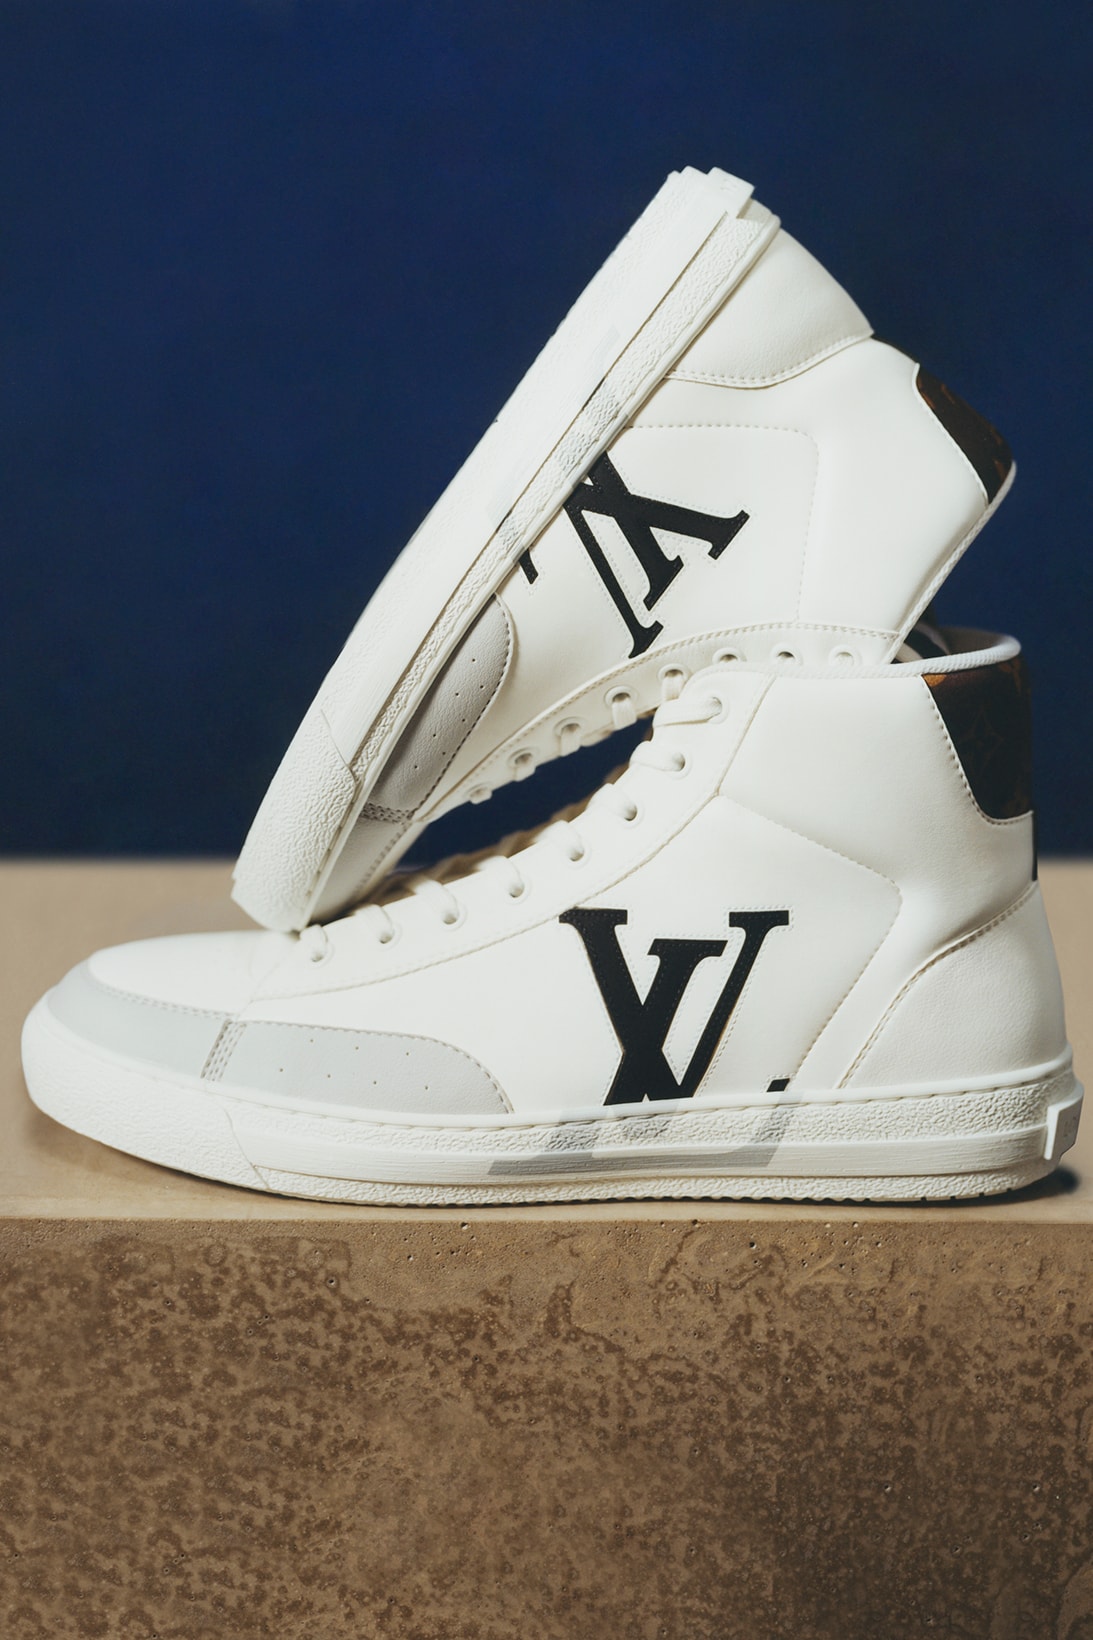 Louis Vuitton's New Skate Sneaker Is Even Bigger (Or at Least the